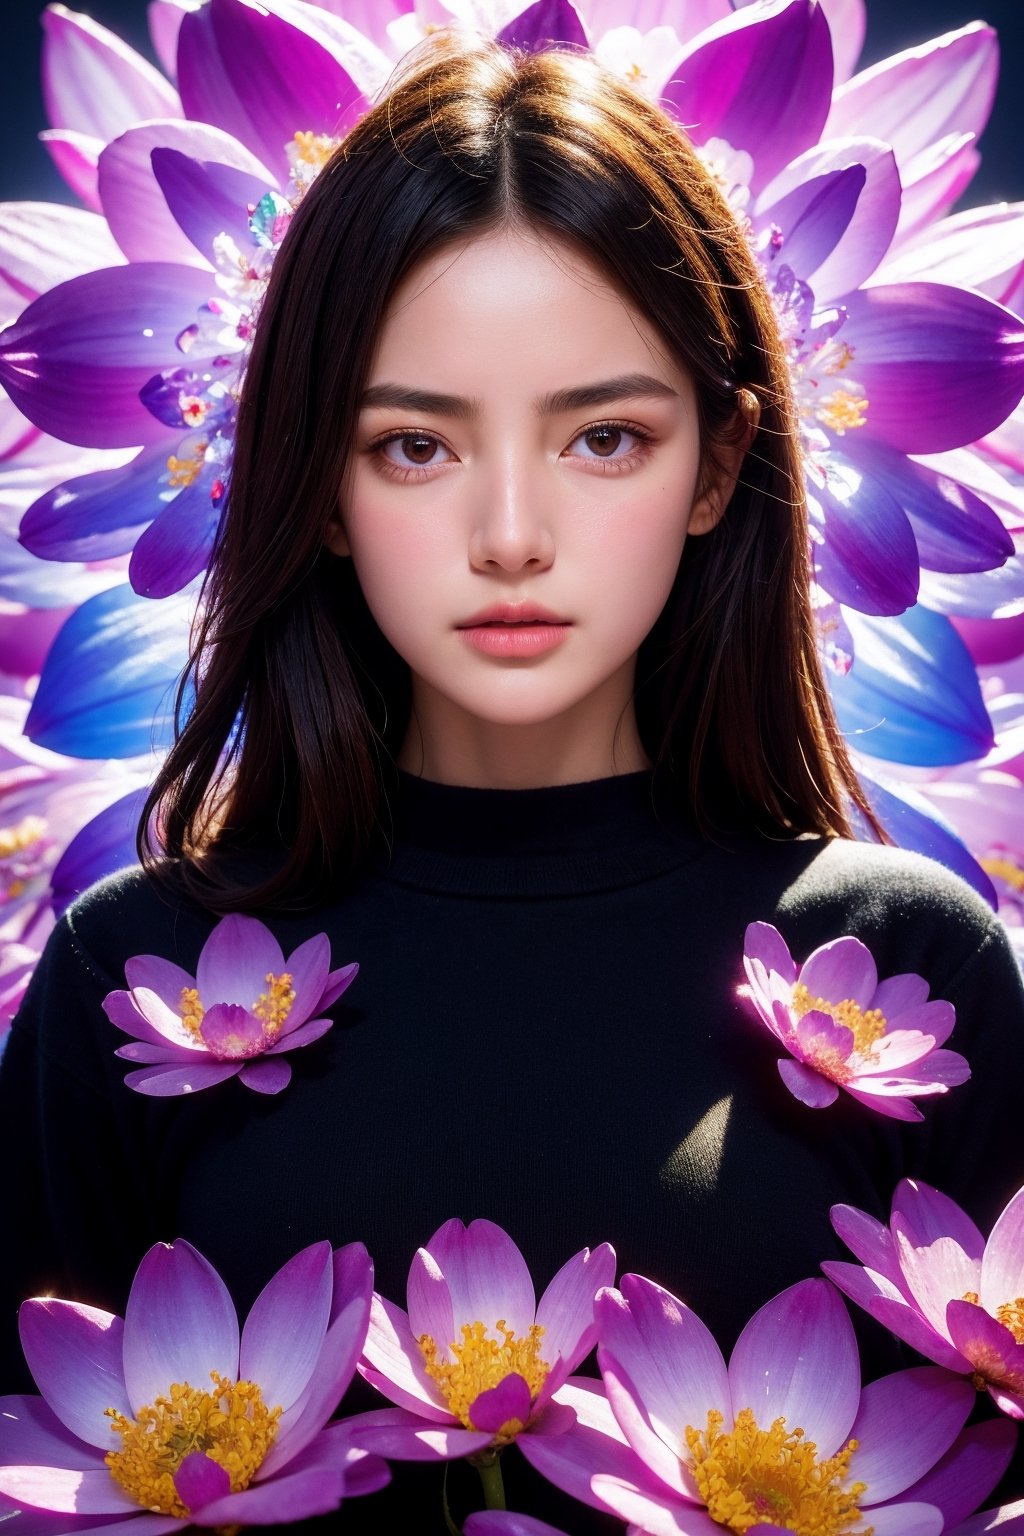 1girl, black background, black eyes, black shirt, black sweater, closed mouth, grey eyes, lips, long hair, long sleeves, looking at viewer, flower, extremely high quality high detail RAW color photo, crystal flower, intricate crystal patterns, translucent petals, prismatic light refraction, sharp, precise edges, detailed textures, luminous glow,